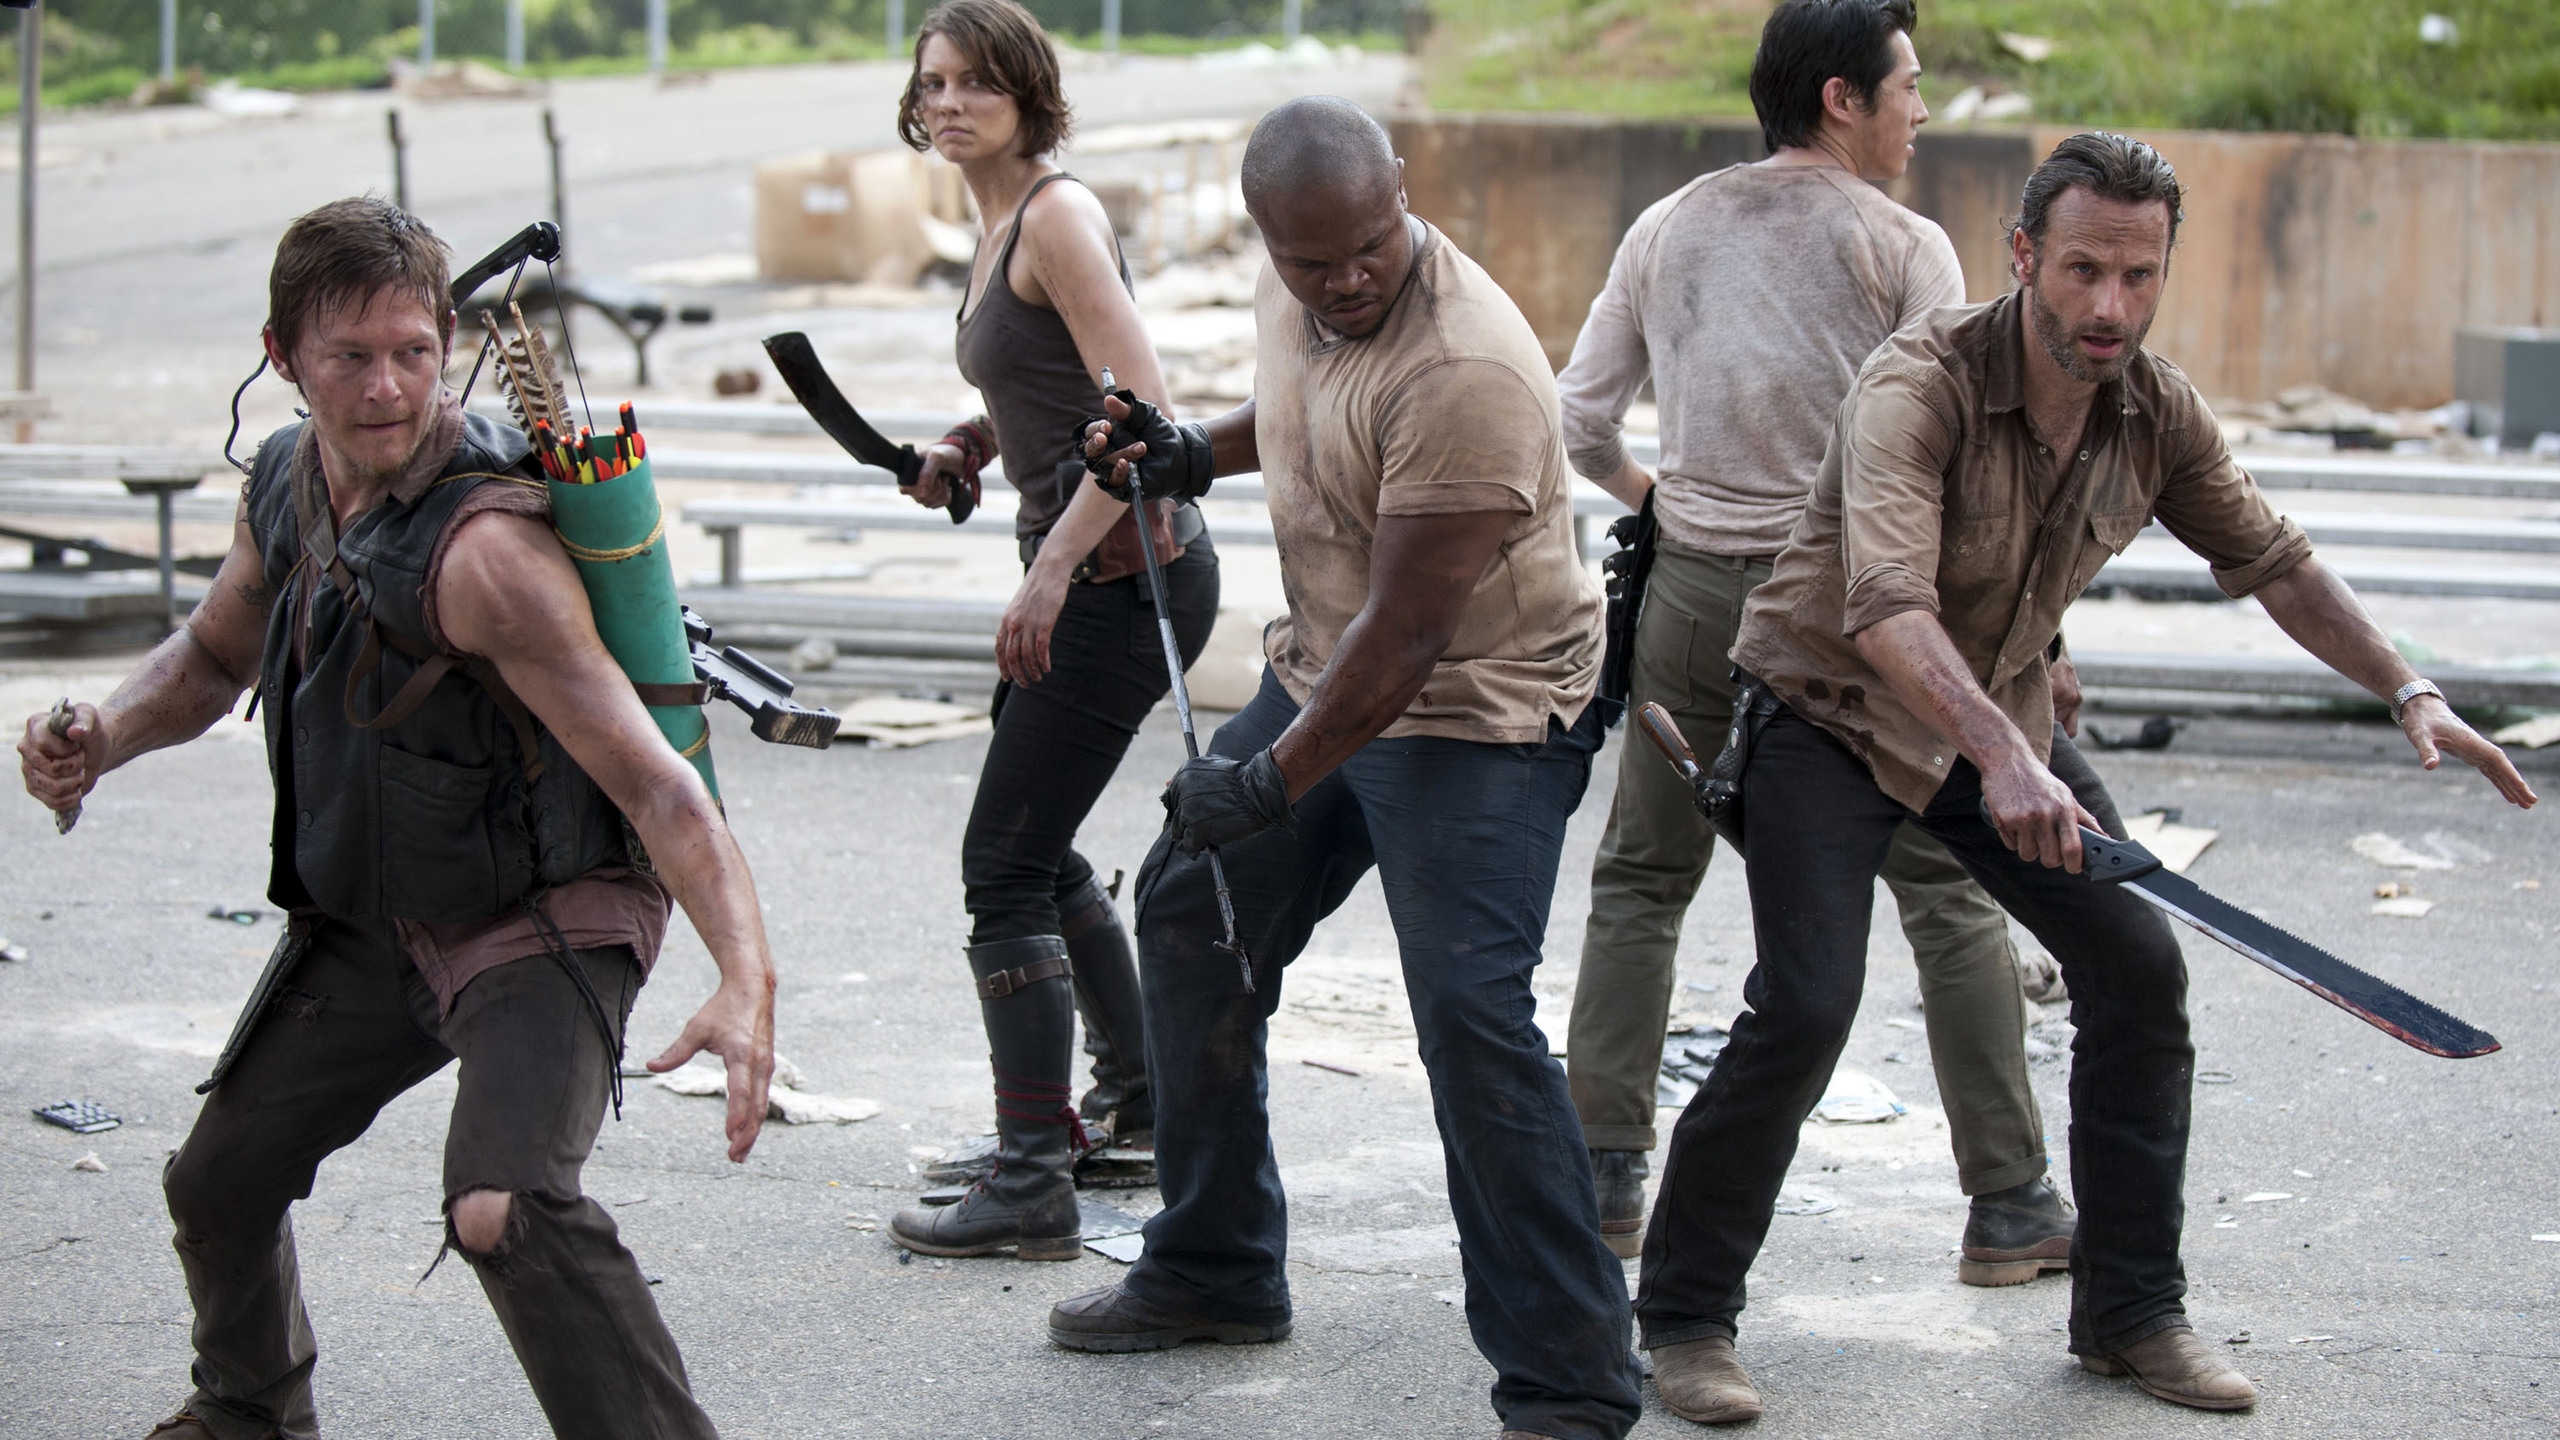 The Walking Dead Cast for 2560x1440 HDTV resolution